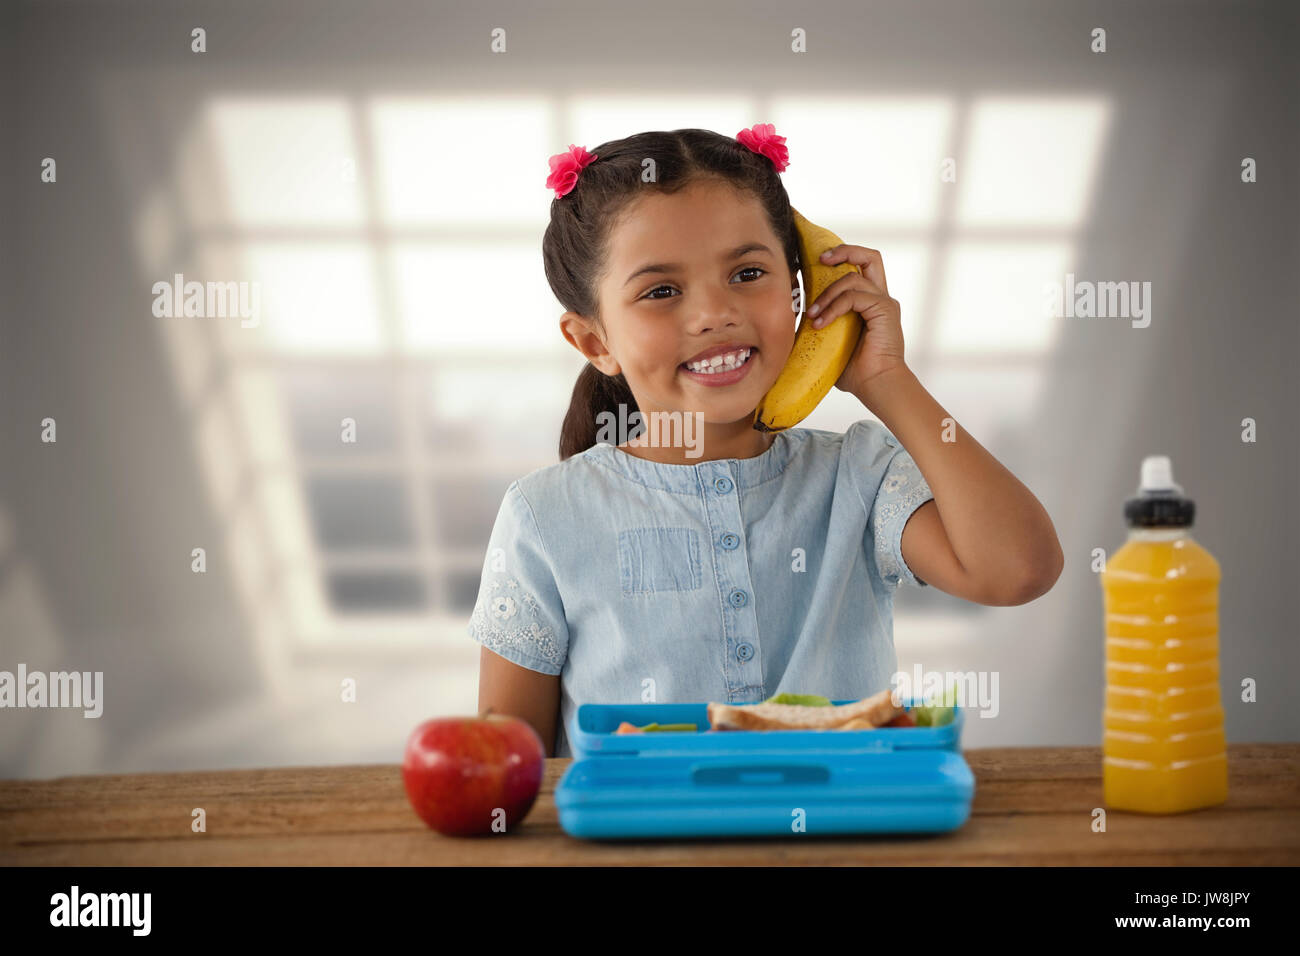 Smiling girl using banana as phone against room with large window showing city Stock Photo